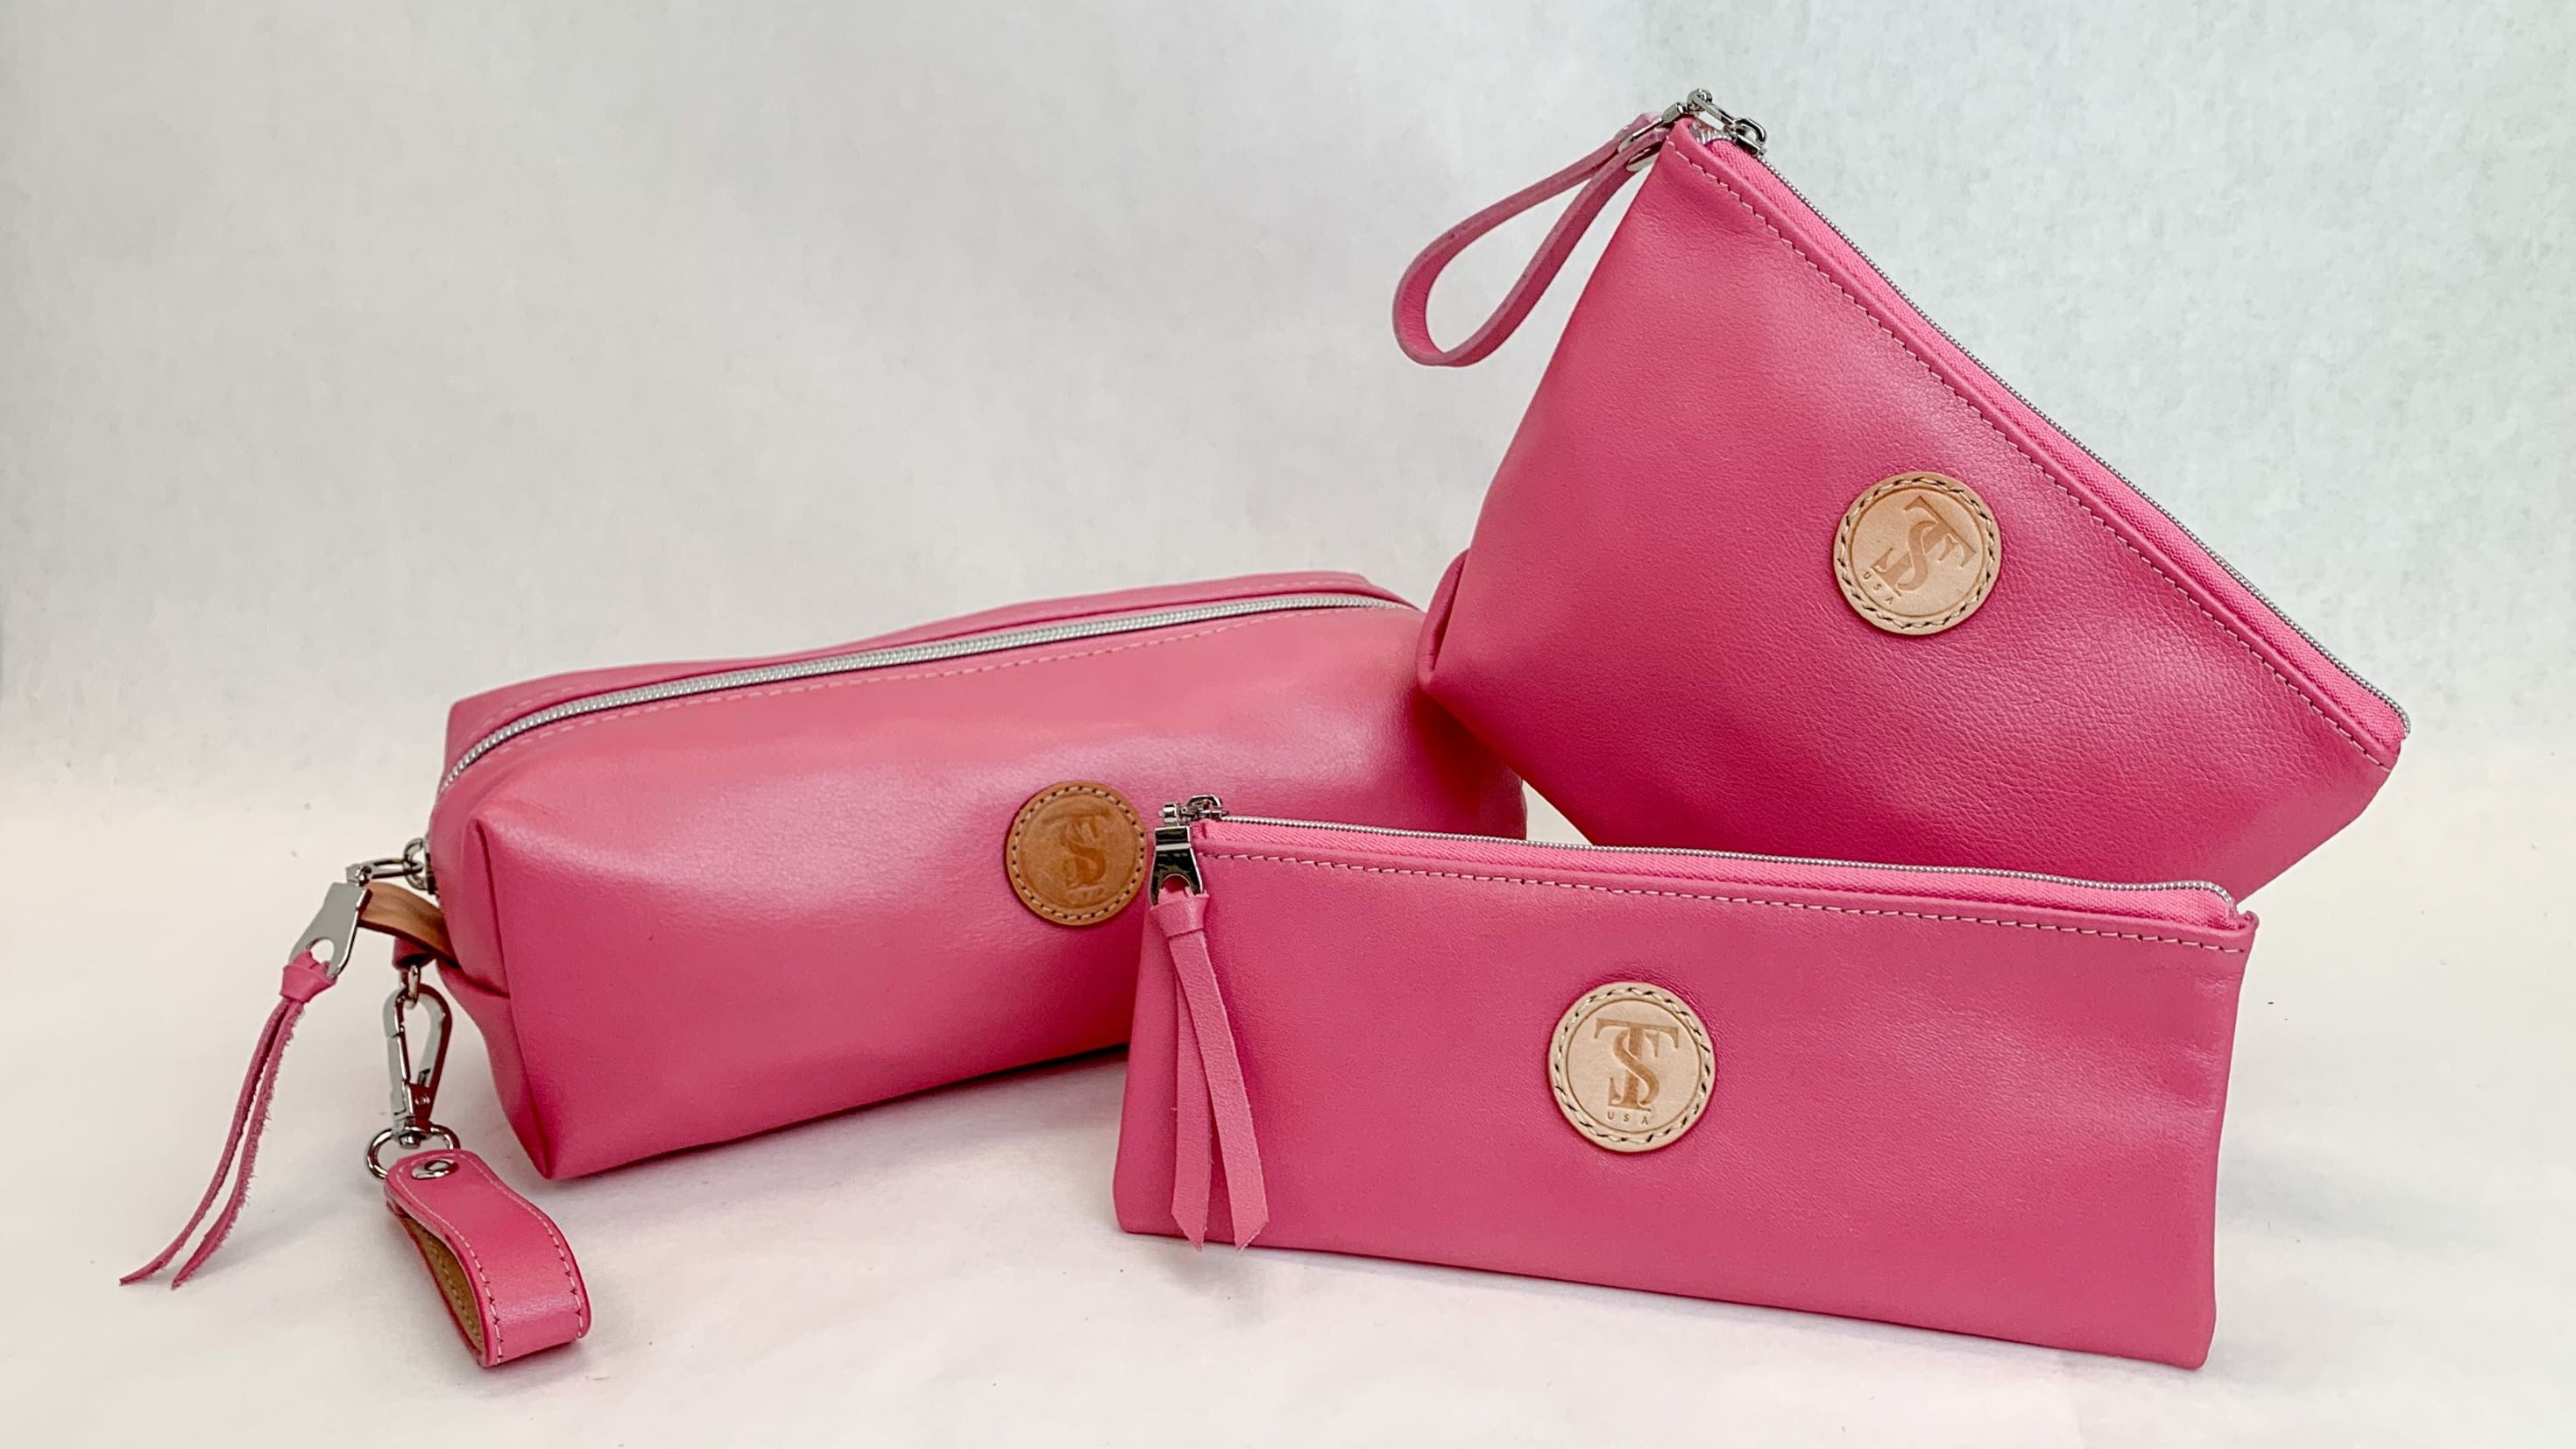 Town & Shore Handcrafted T5 Leather bath kit, cosmetics bag and travel cases in pink calfskin leather. Perfect for organizing cosmetics, toiletries and supplies.